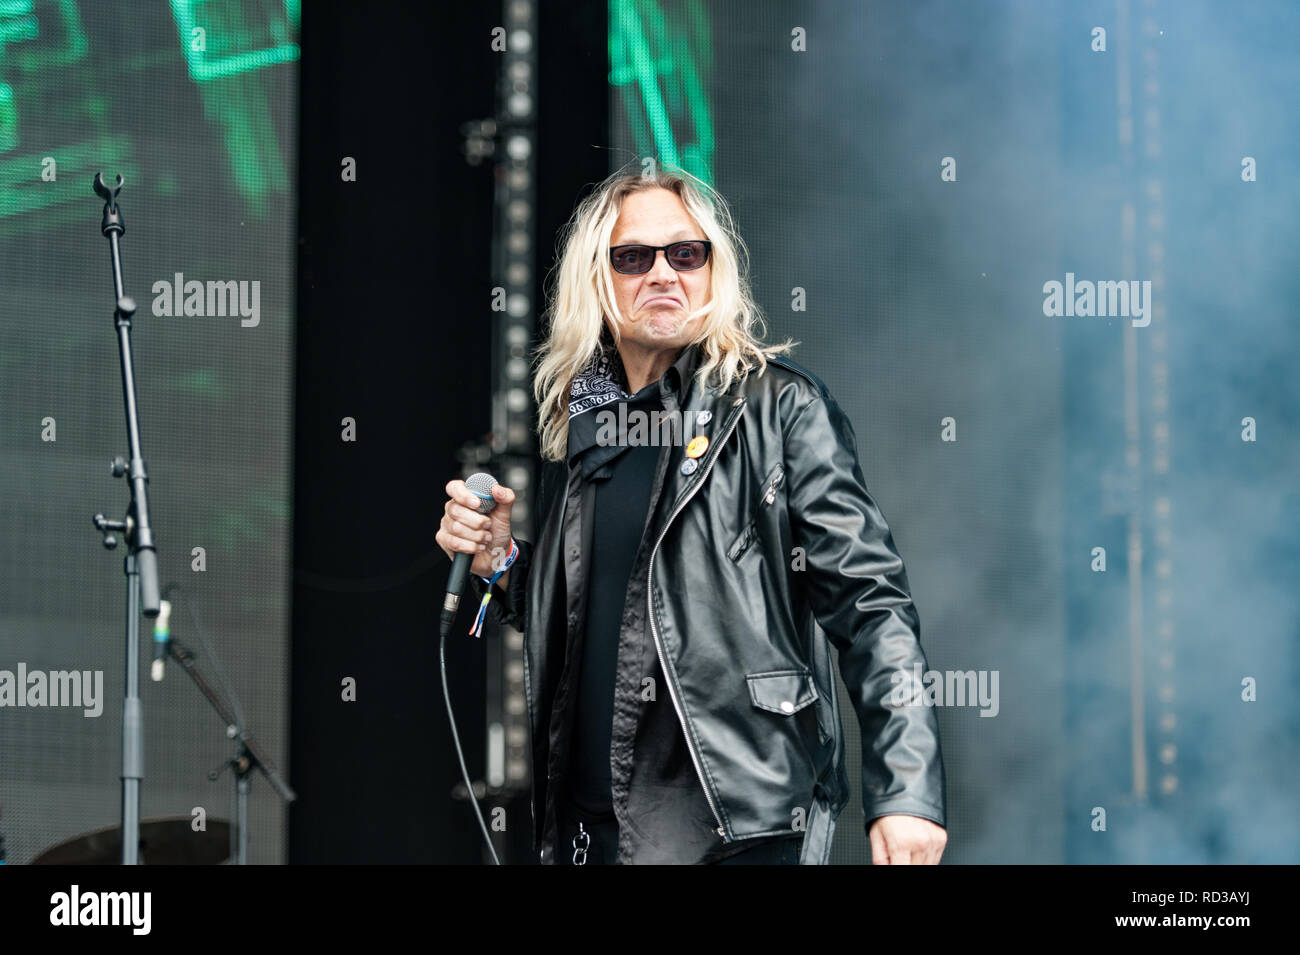 Crazyhead on stage at the Bearded theory music festival Stock Photo